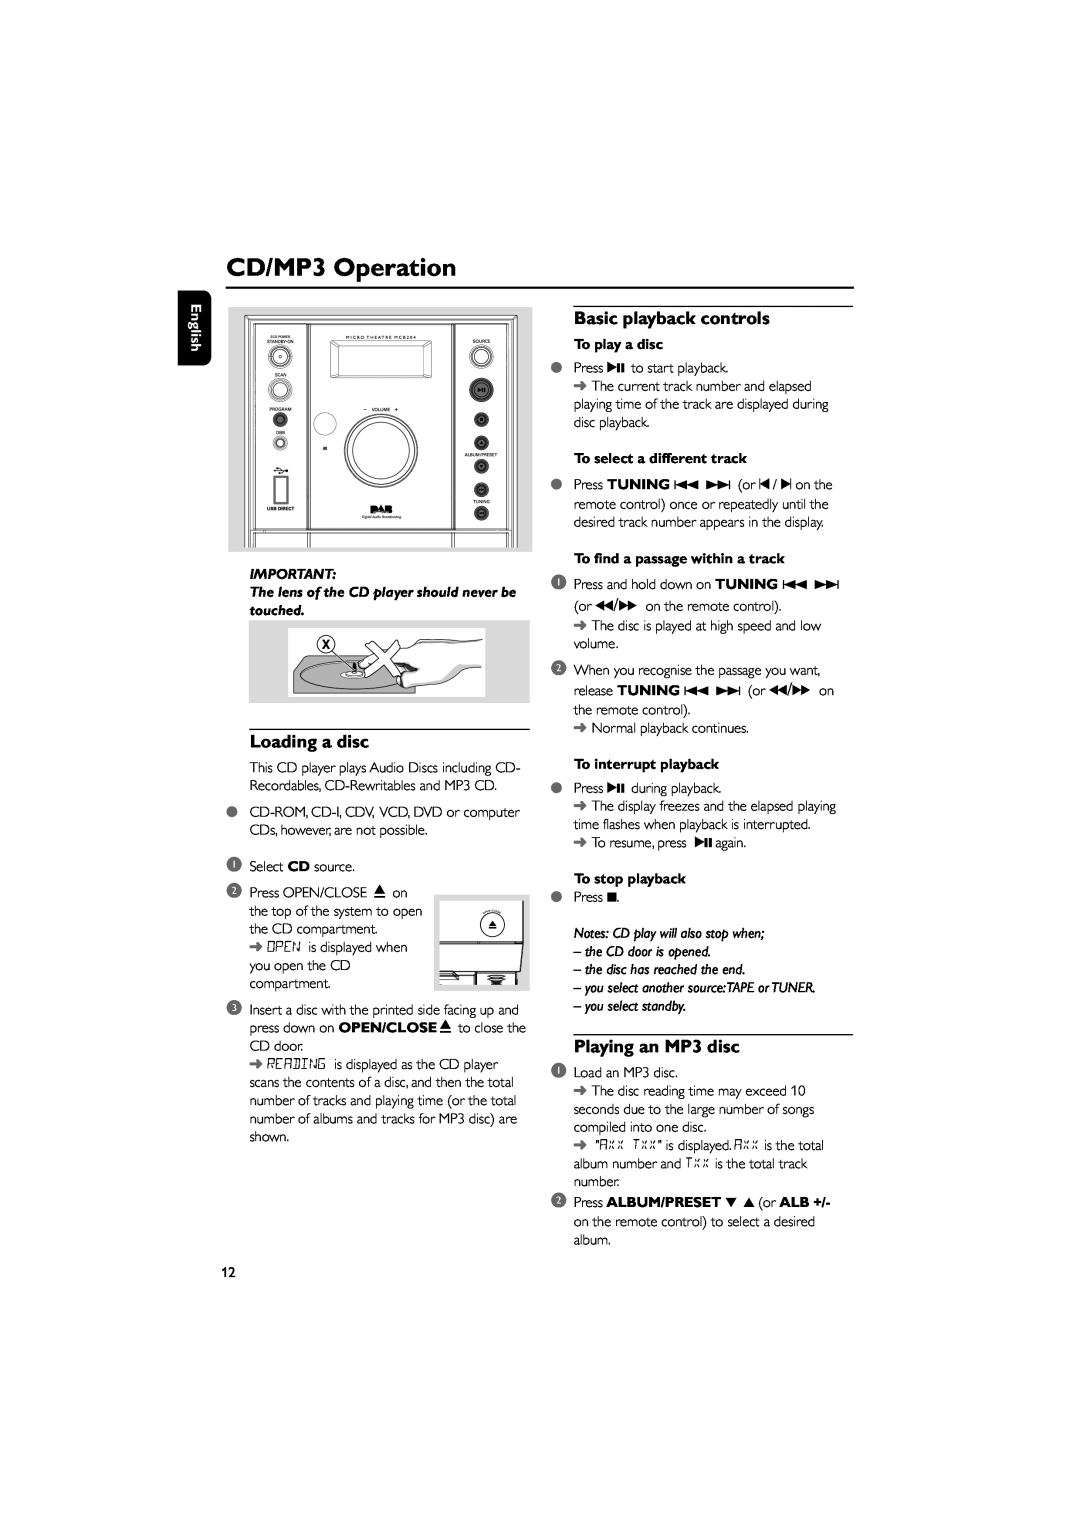 Philips MCB204 user manual CD/MP3 Operation, Loading a disc, Basic playback controls, Playing an MP3 disc, To play a disc 